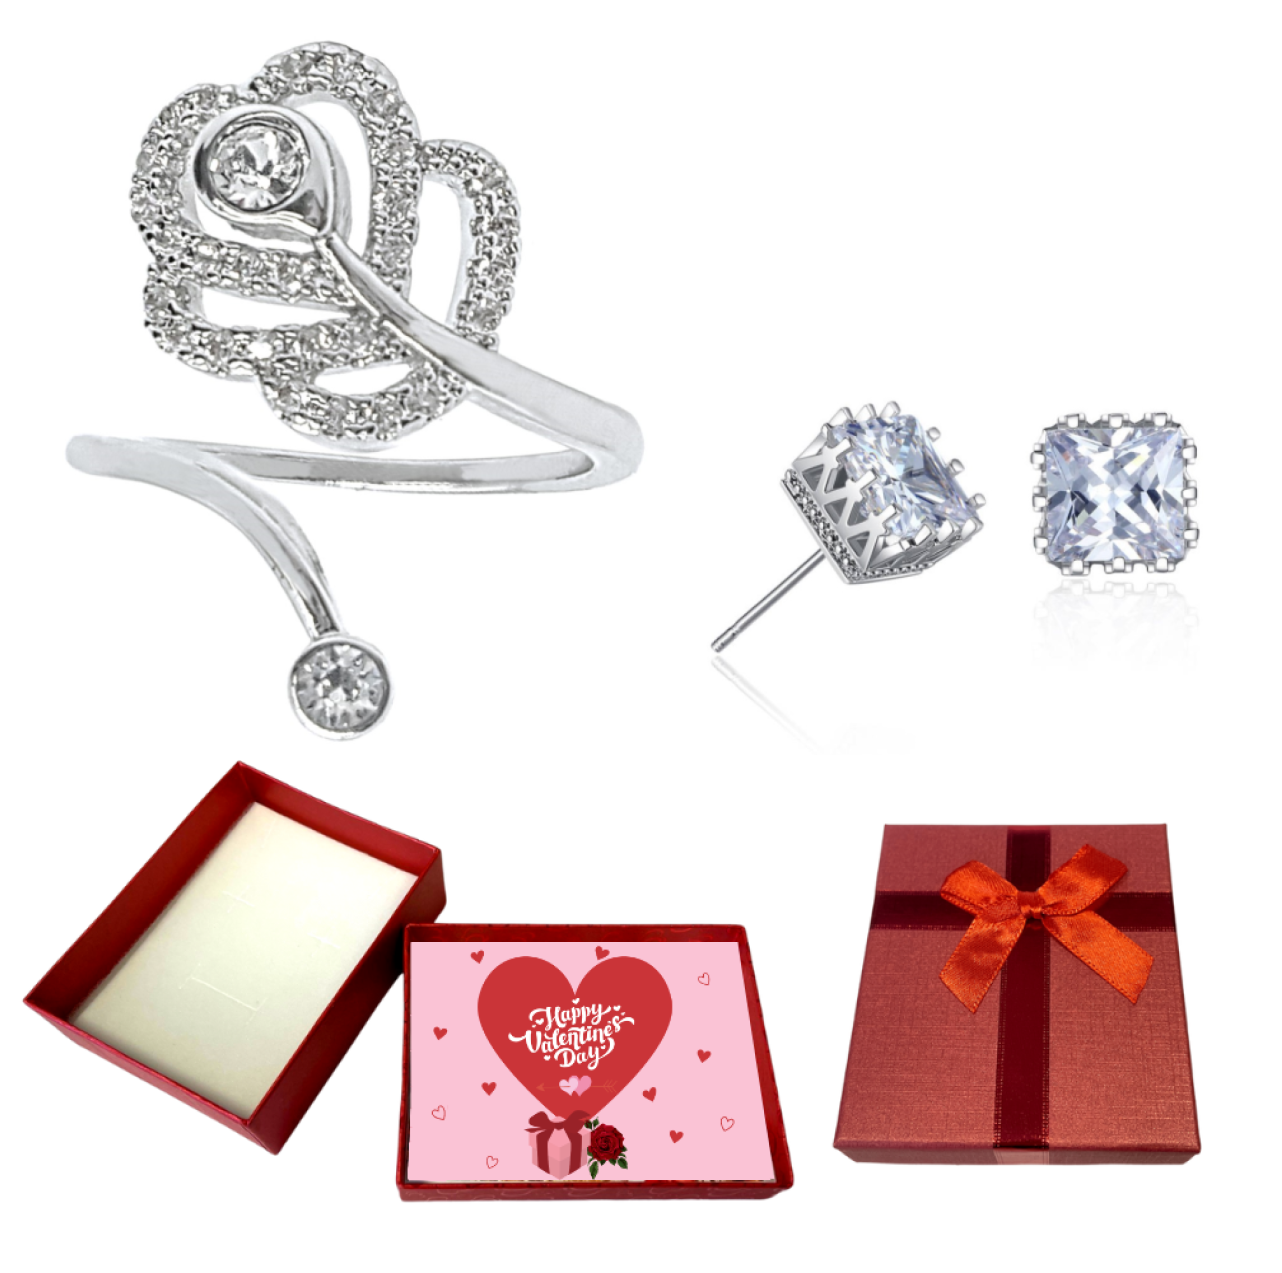 20 pcs - Open Flower Adjustable Ring and Crystal Crown Stud Earrings Set with Valentines Gift Box - 10 Sets|GCJ087+GCJ122-Silver-Valentine Box|UK SELL